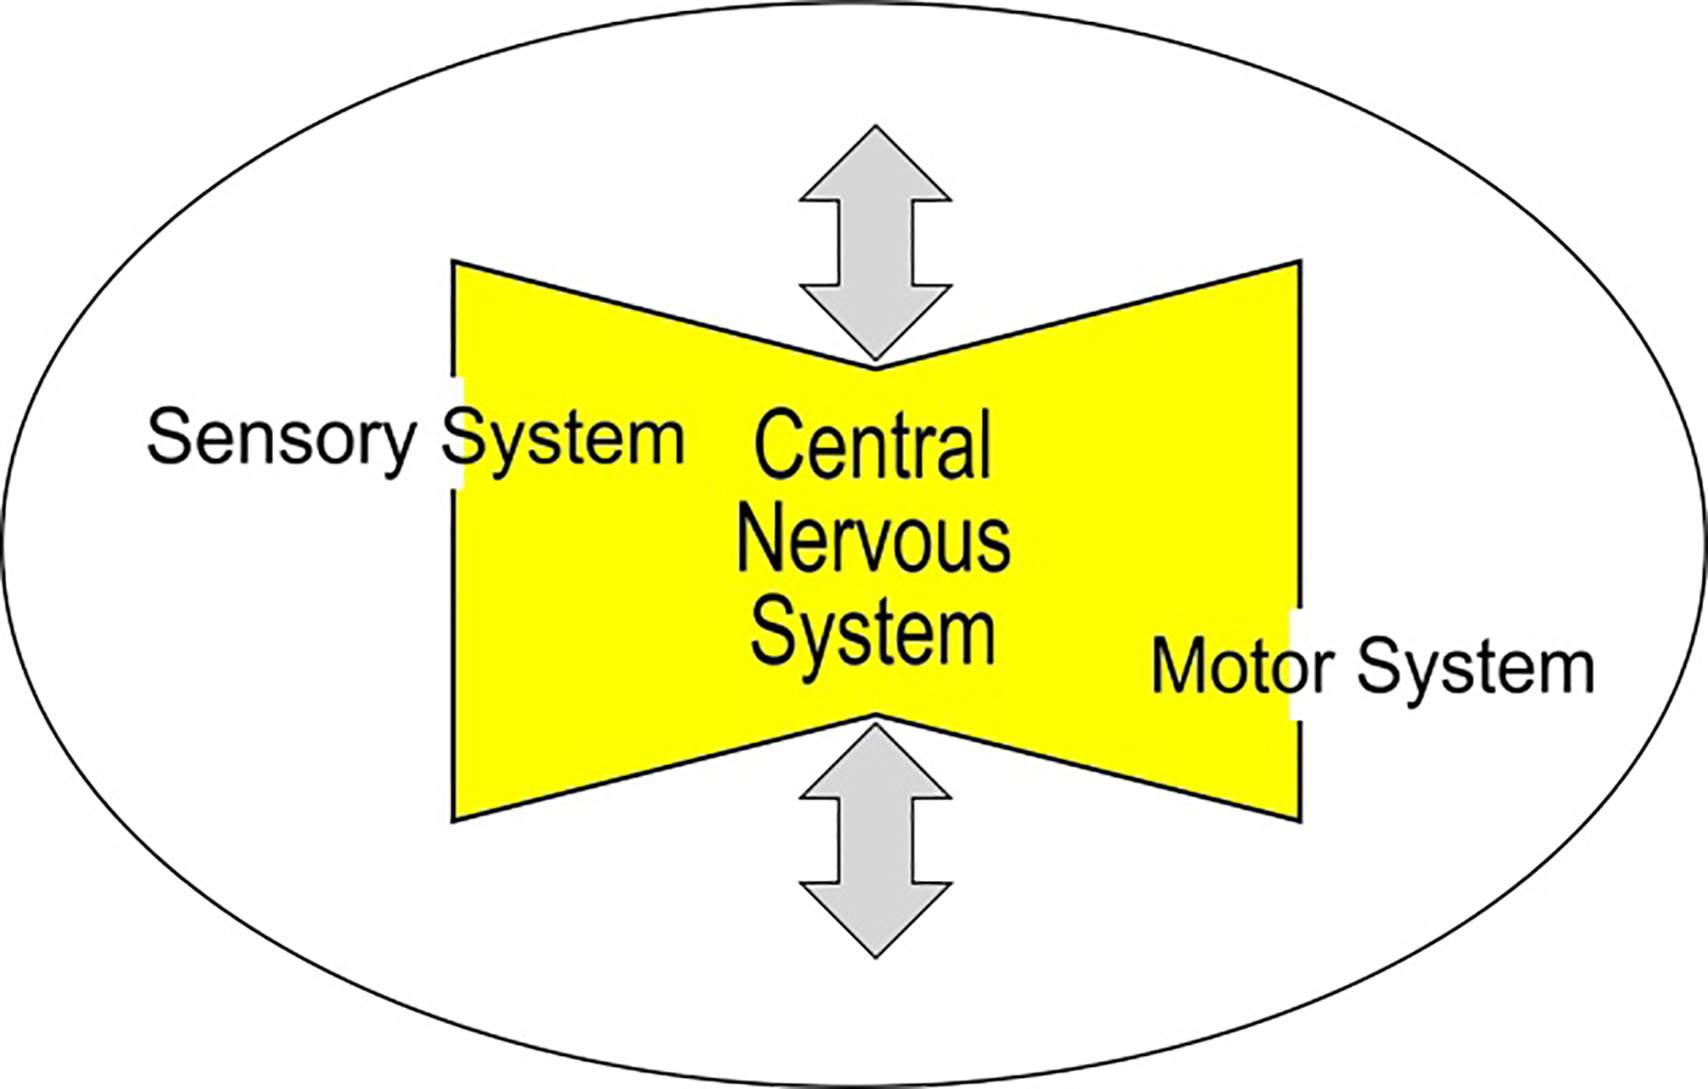 Age-adjusted work design via obeying the effects of aging on the sensory and motor system and on the central nervous system.